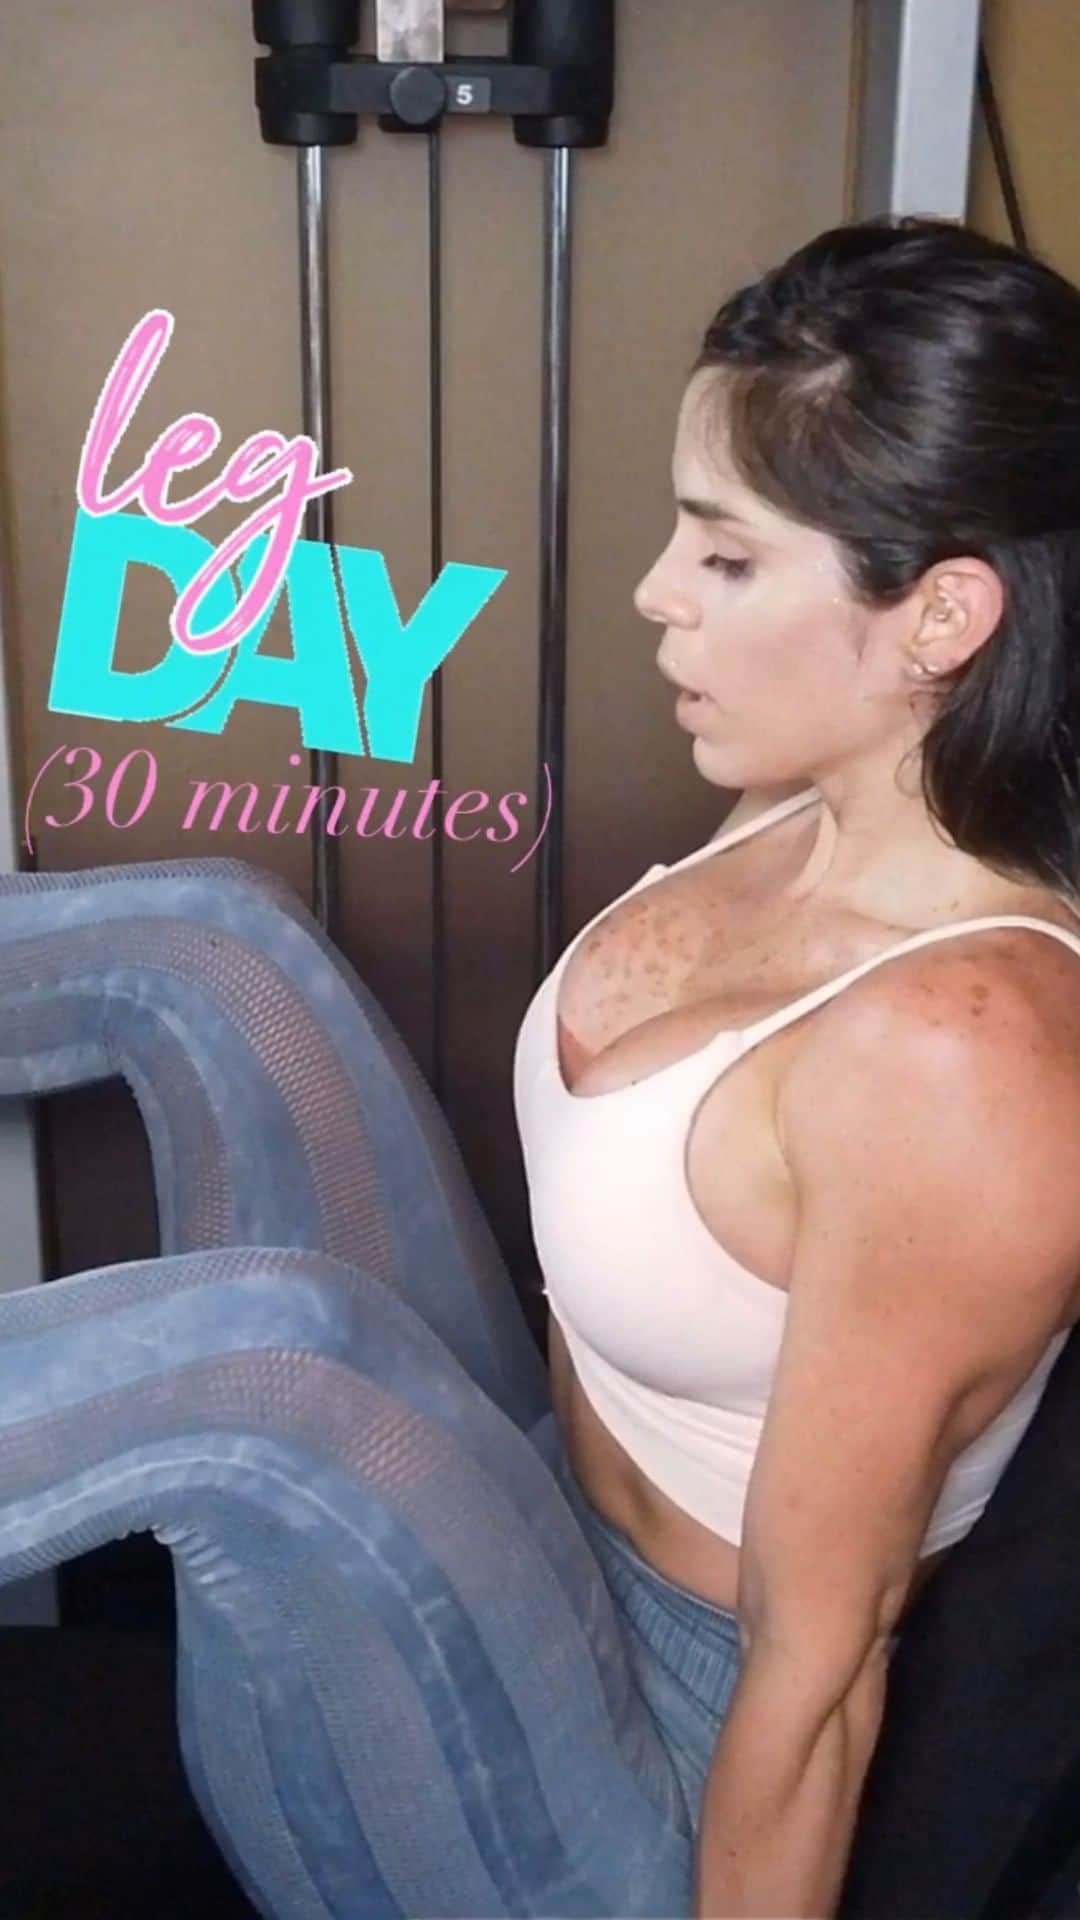 Michelle Lewinのインスタグラム：「Almost no editing or cutting... A 30 minute workout video, just let the video play and let's TRAIN THOSE LEGS: YOU... and ME🏋🏼‍♀️🏋🏽‍♀️👍🏻  This video might be boring if you are just here to only watch, but it’s the best way for you to get a great butt-kicking training with me and it's 100% real and personal.  -Save this video for your next glute and leg day, and let me know what you think!🥳👍🏻 Outfit: @one0one_101 Train with me on the app Fitplan (English y Español). Download it from my website (link in bio) and start for free! Let’s do this!😘」